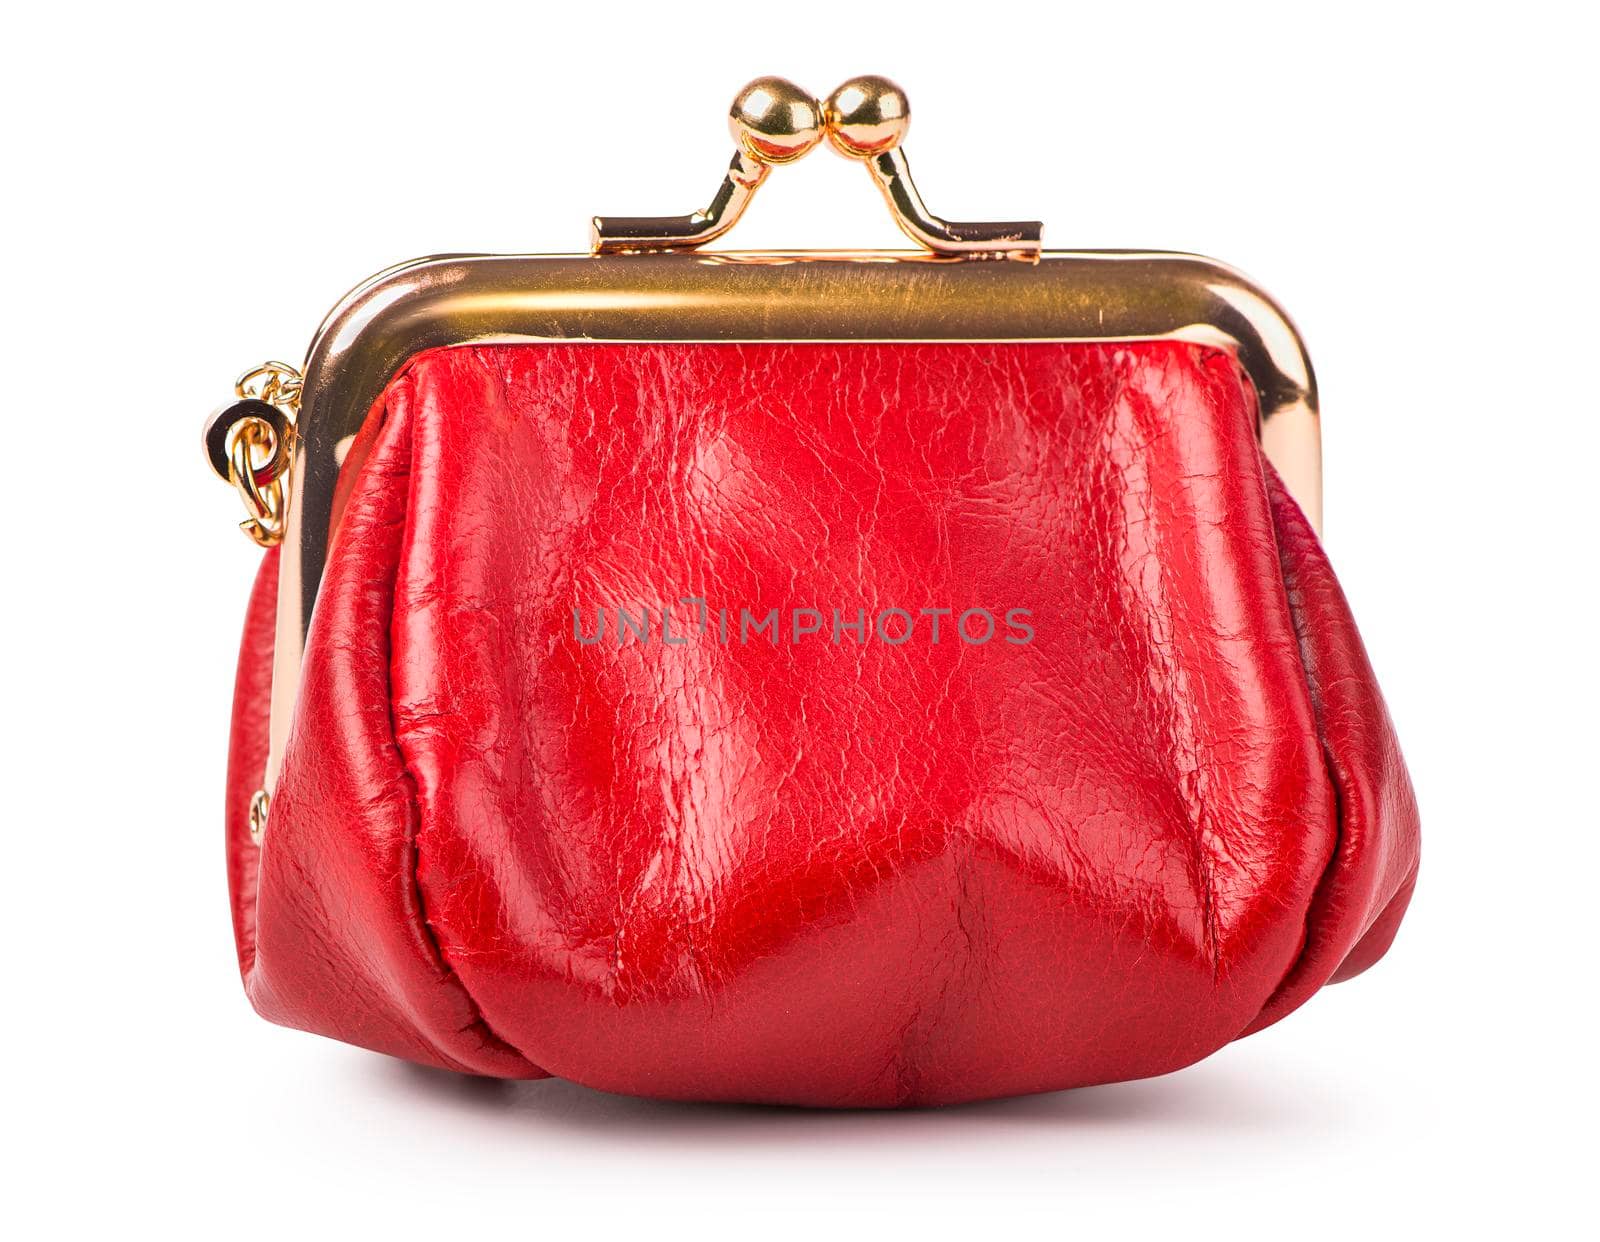 Red leather purse isolated on white background